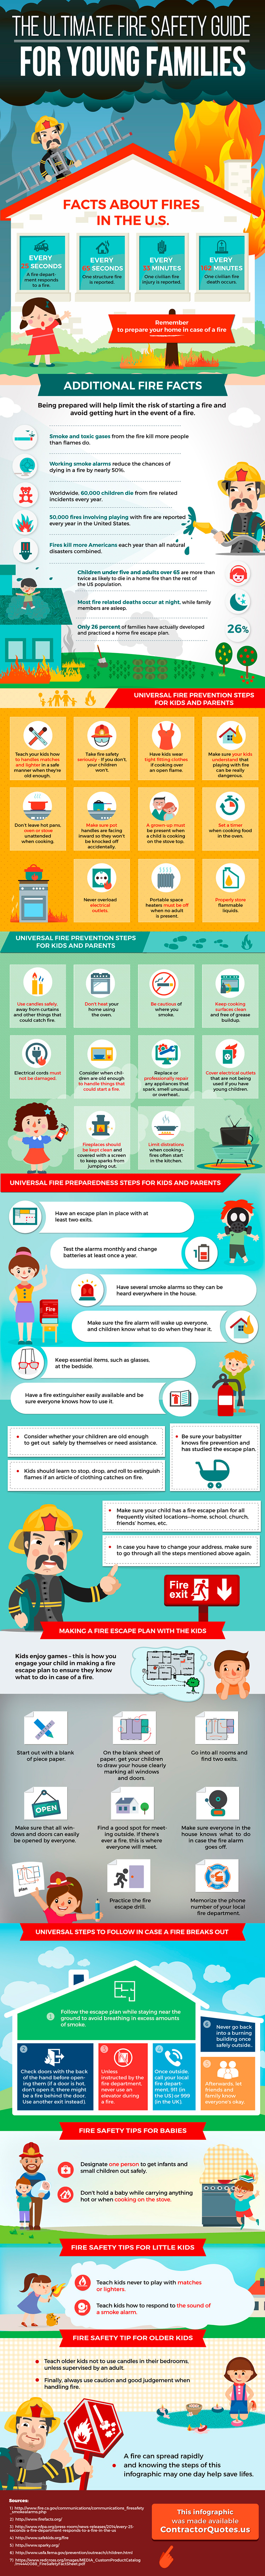 Fire Safety For kids